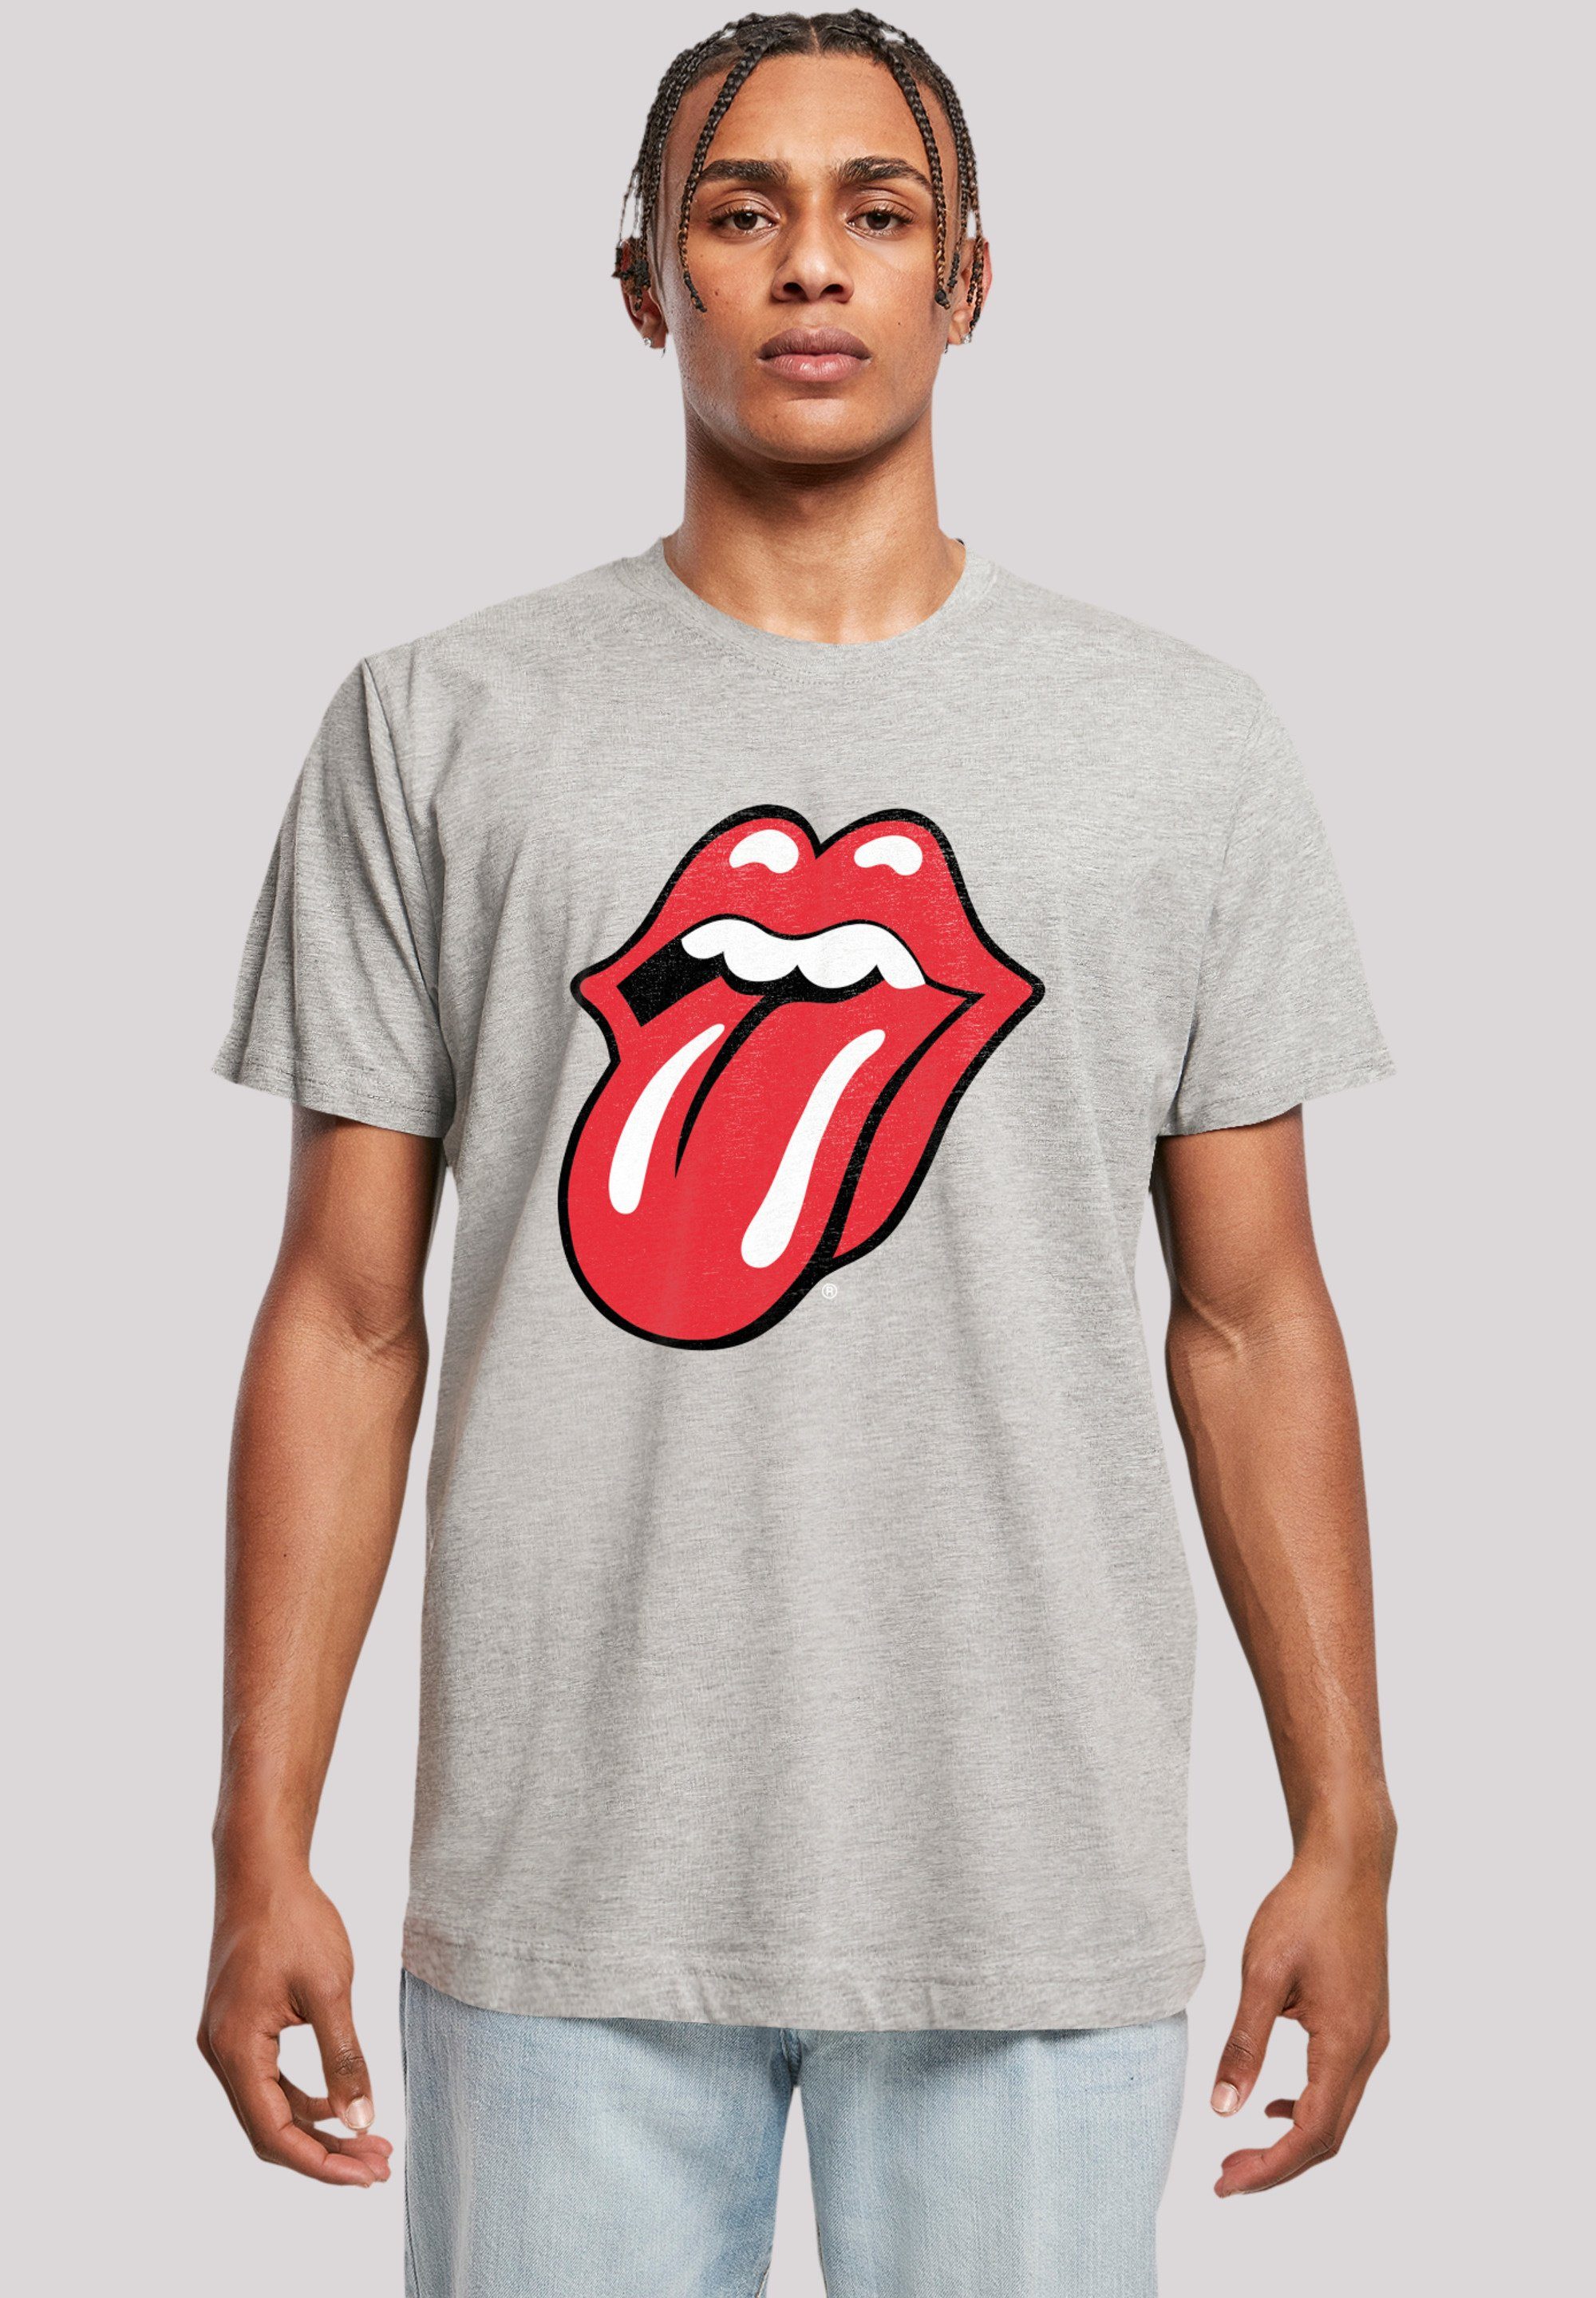 F4NT4STIC T-Shirt The Rolling Rolling Stones Offiziell Zunge Print, T-Shirt The Stones Rote lizenziertes